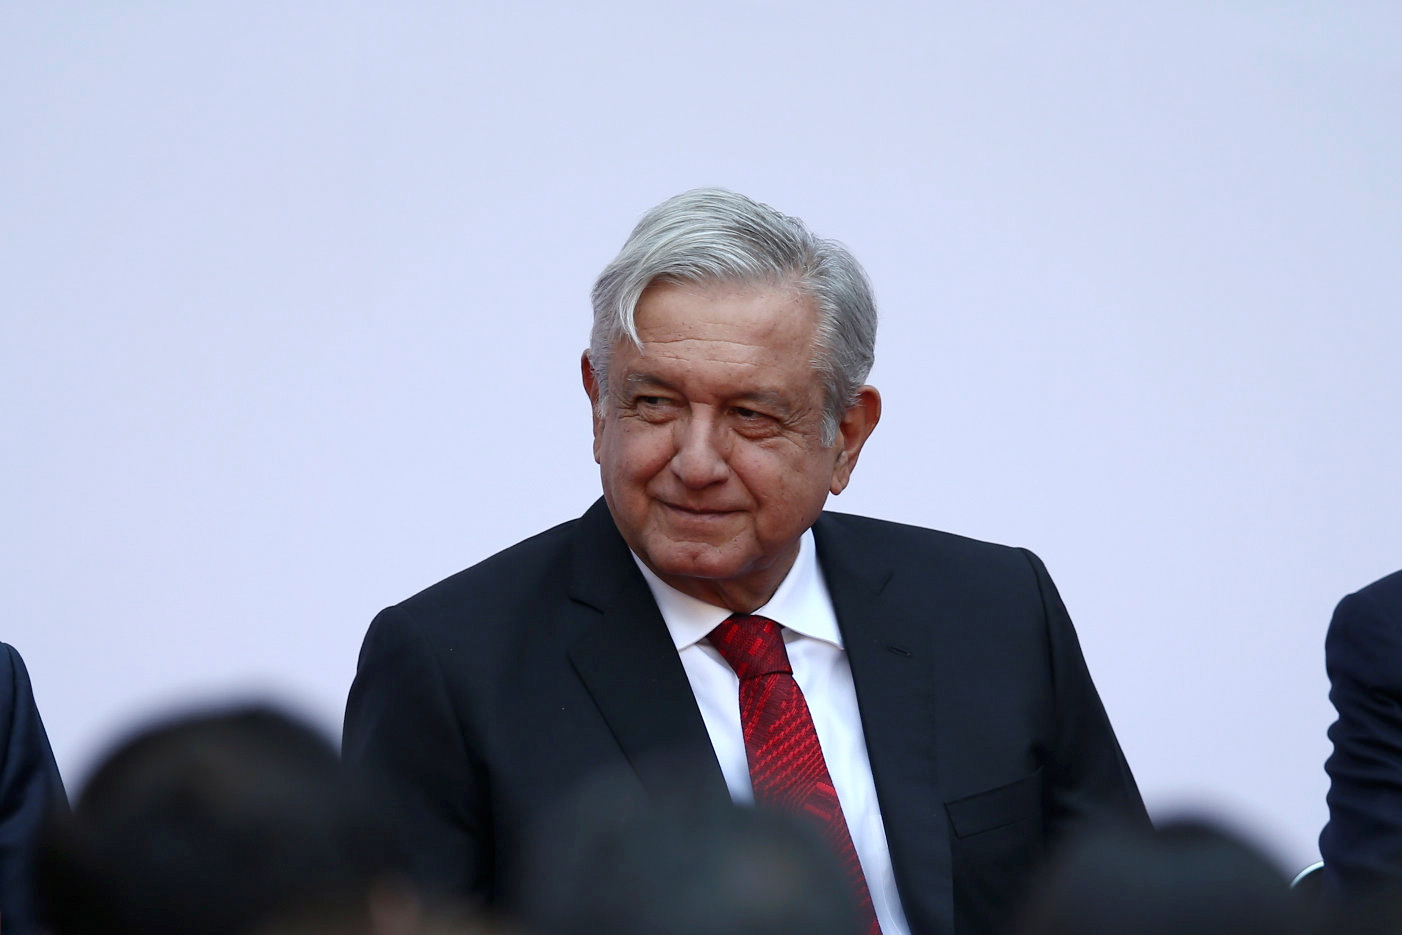 Mexico's President Andres Manuel Lopez Obrador looks on before a speech marking the first 100 days of his presidency at the National Palace in Mexico City, Mexico March 11, 2019. REUTERS/Edgard Garrido - RC183BA26AA0